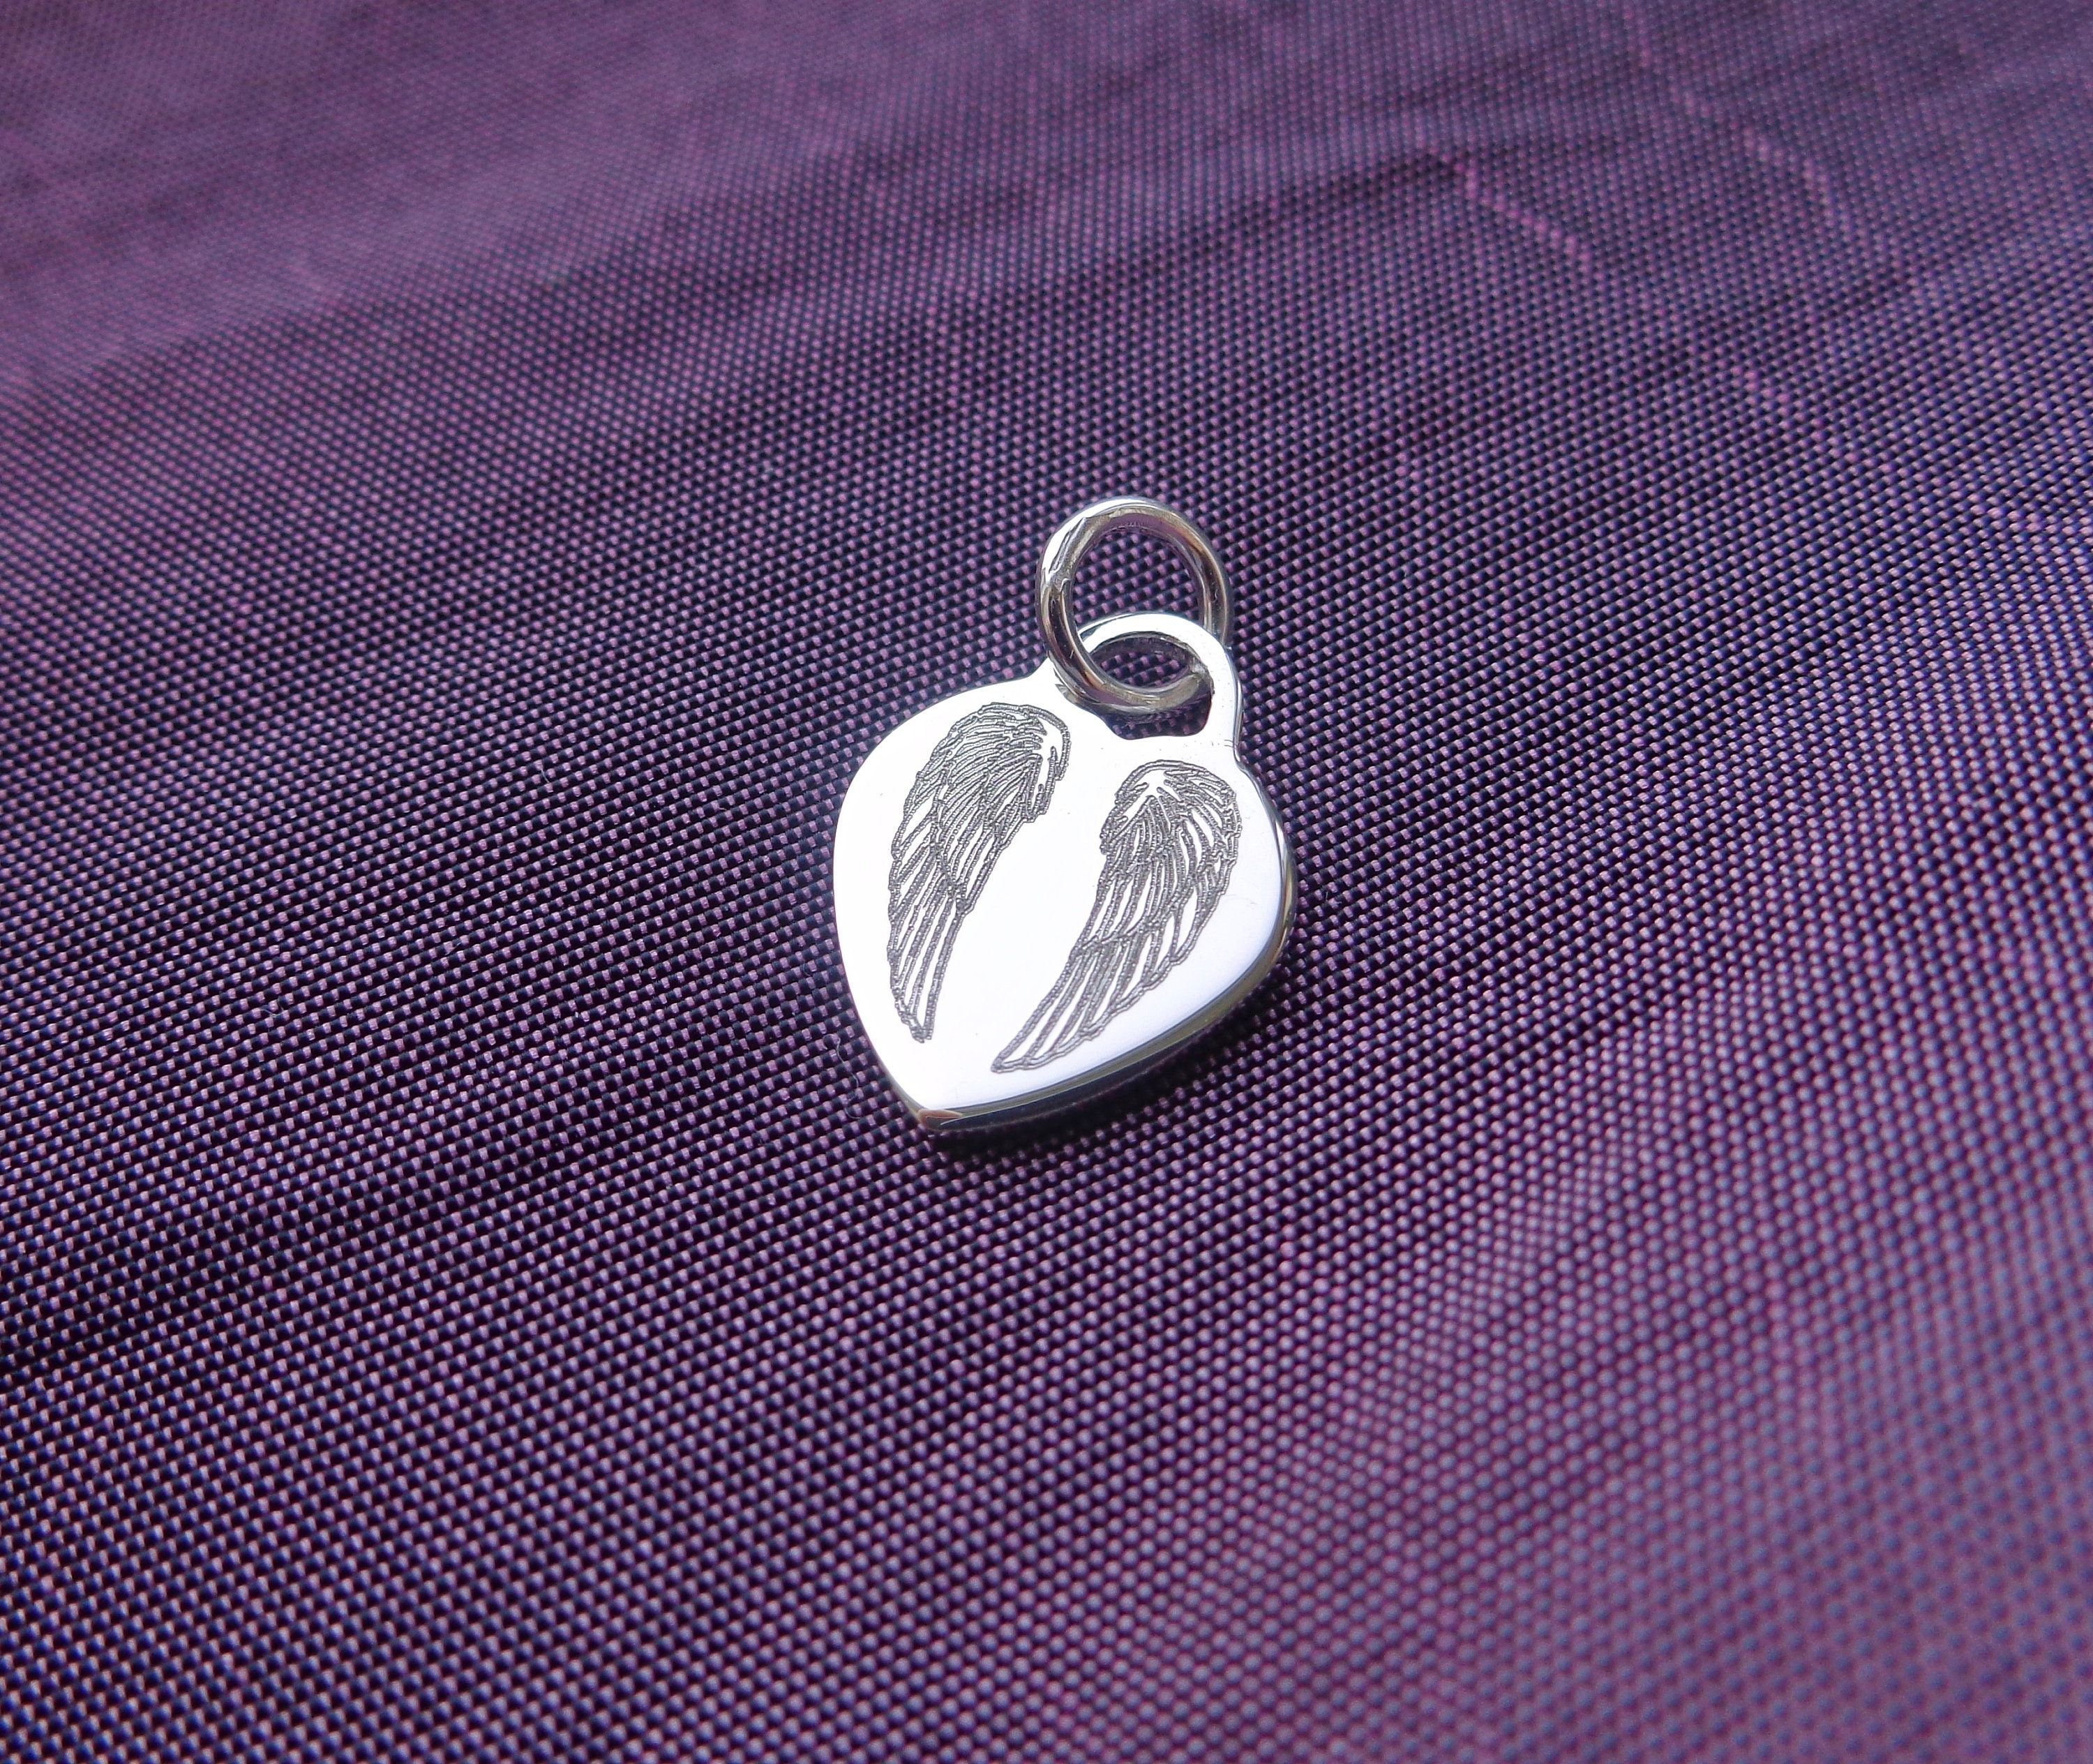 ANGEL WINGS HEART CHARM 925 STERLING SILVER Dangle clip jump ring FREE ENGRAVING